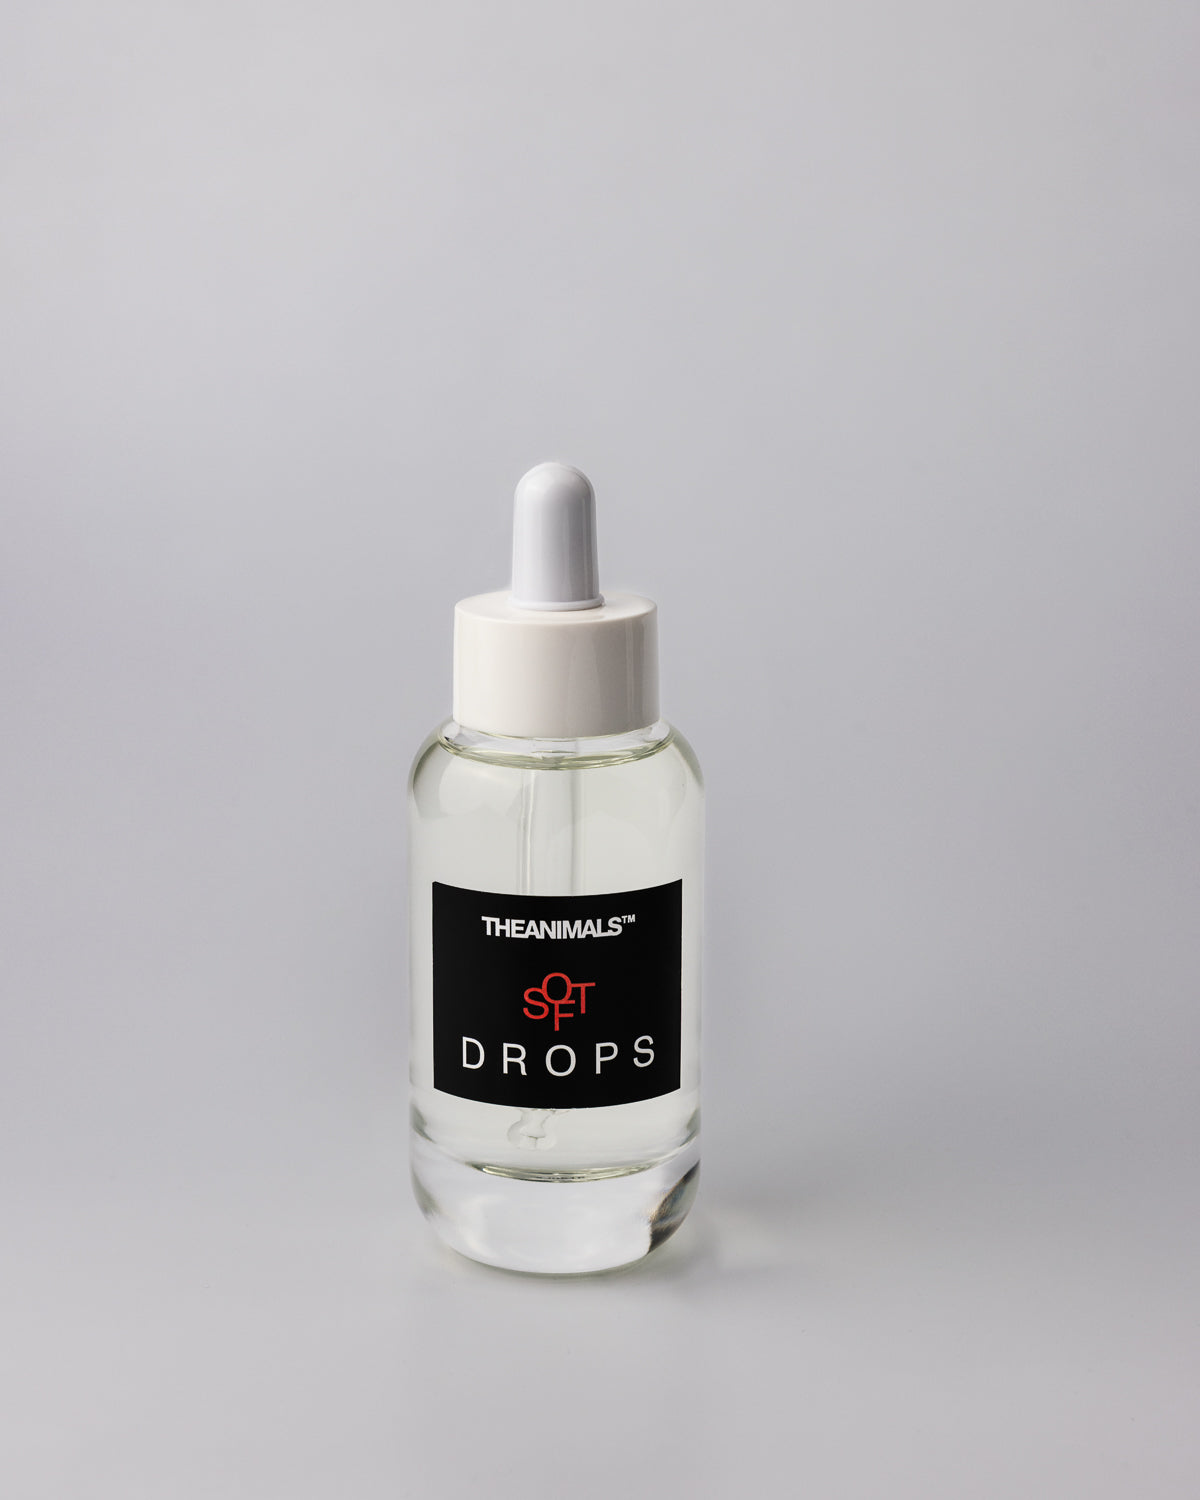 Soft Drops - Eau Tendre Parfumante - A Fragrance To Be Shared By Humans And Animals - 50ml / 1.7 fl. oz. HT Animal Supply